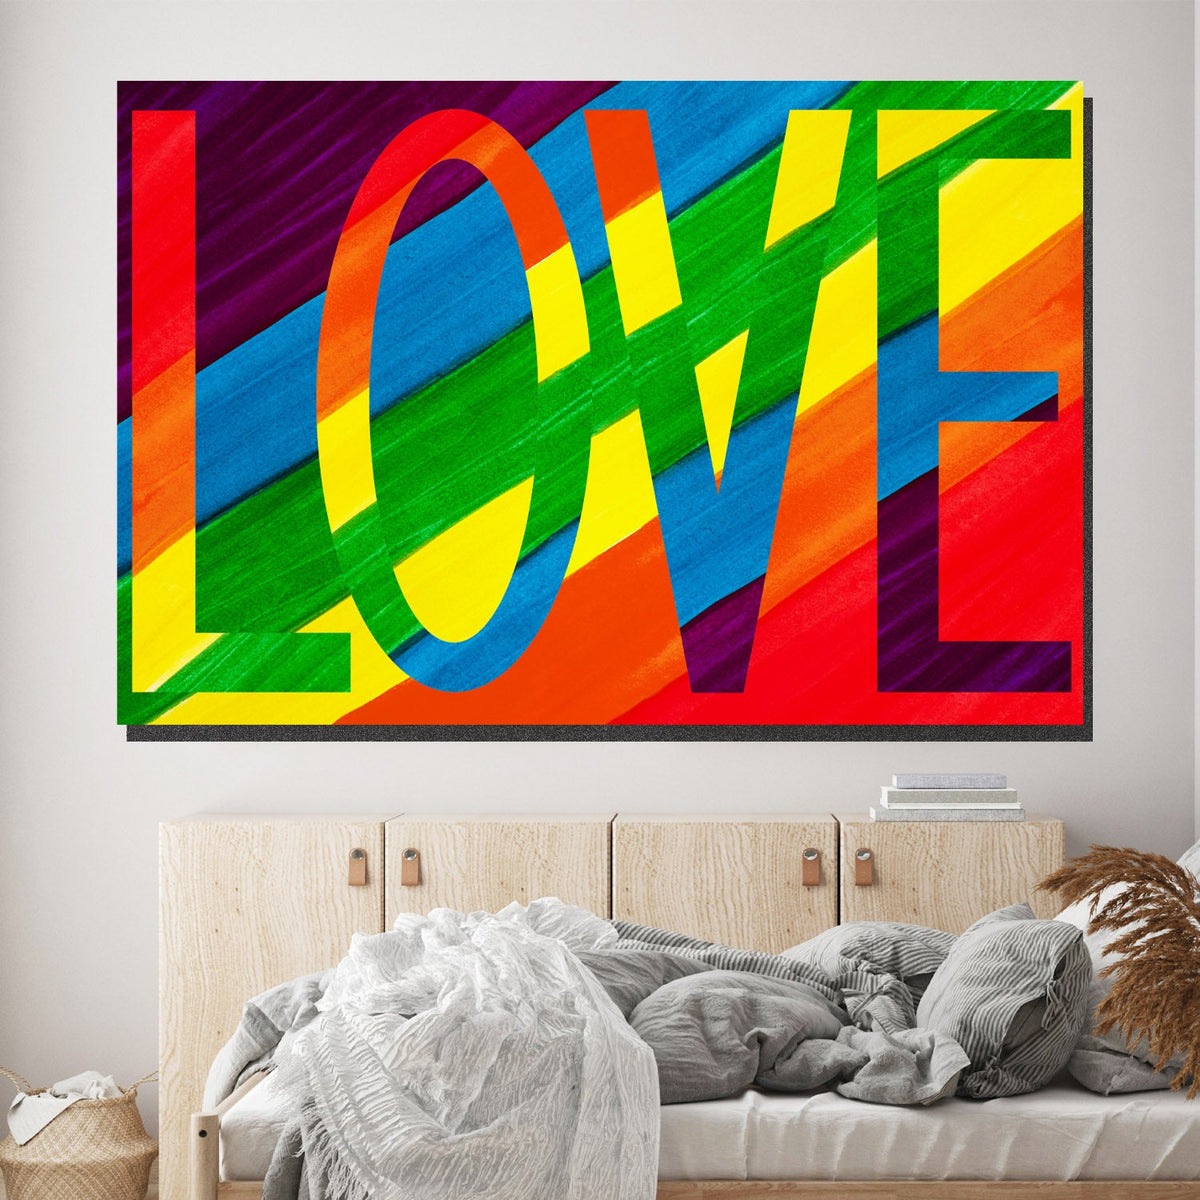 https://cdn.shopify.com/s/files/1/0387/9986/8044/products/ColoursofLoveCanvasArtprintStretched-2.jpg